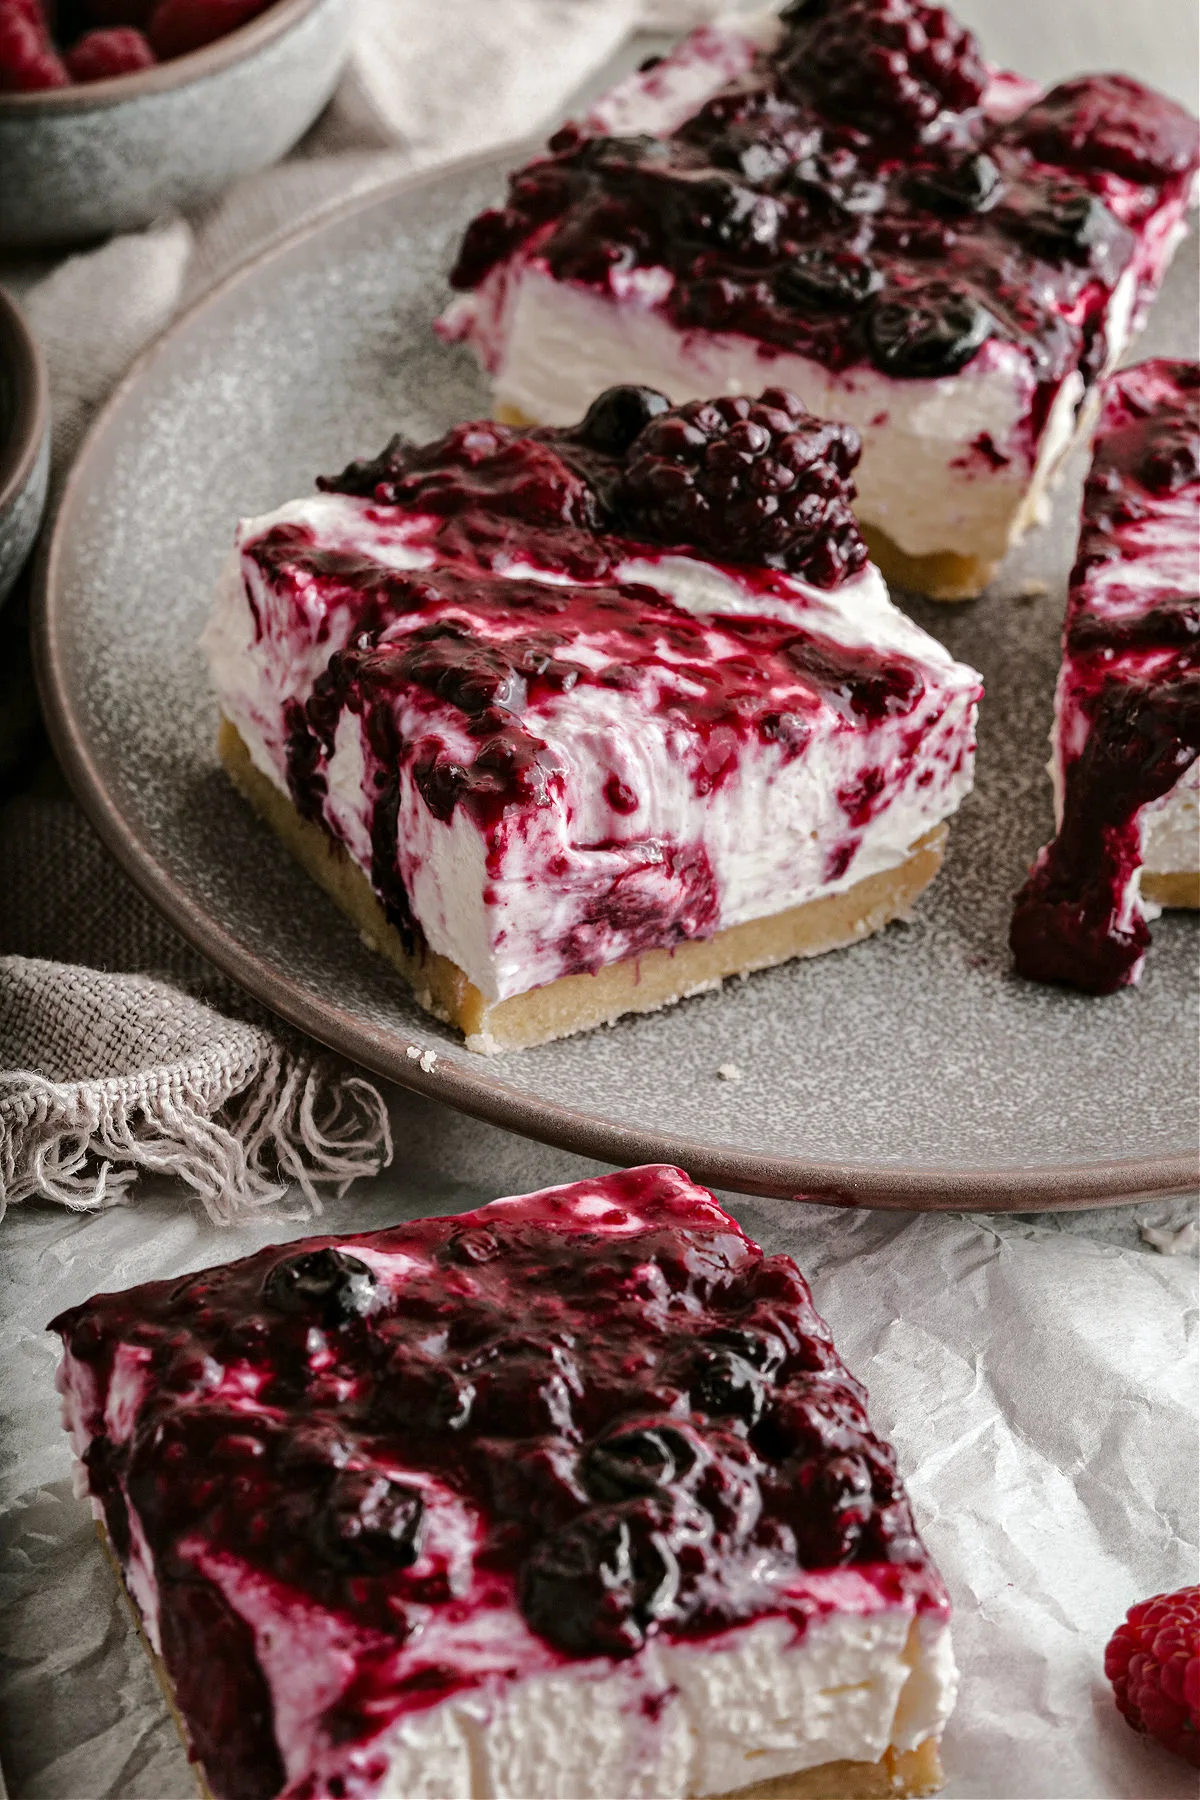 Slices of cheesecake bars on serving plate with berry topping.